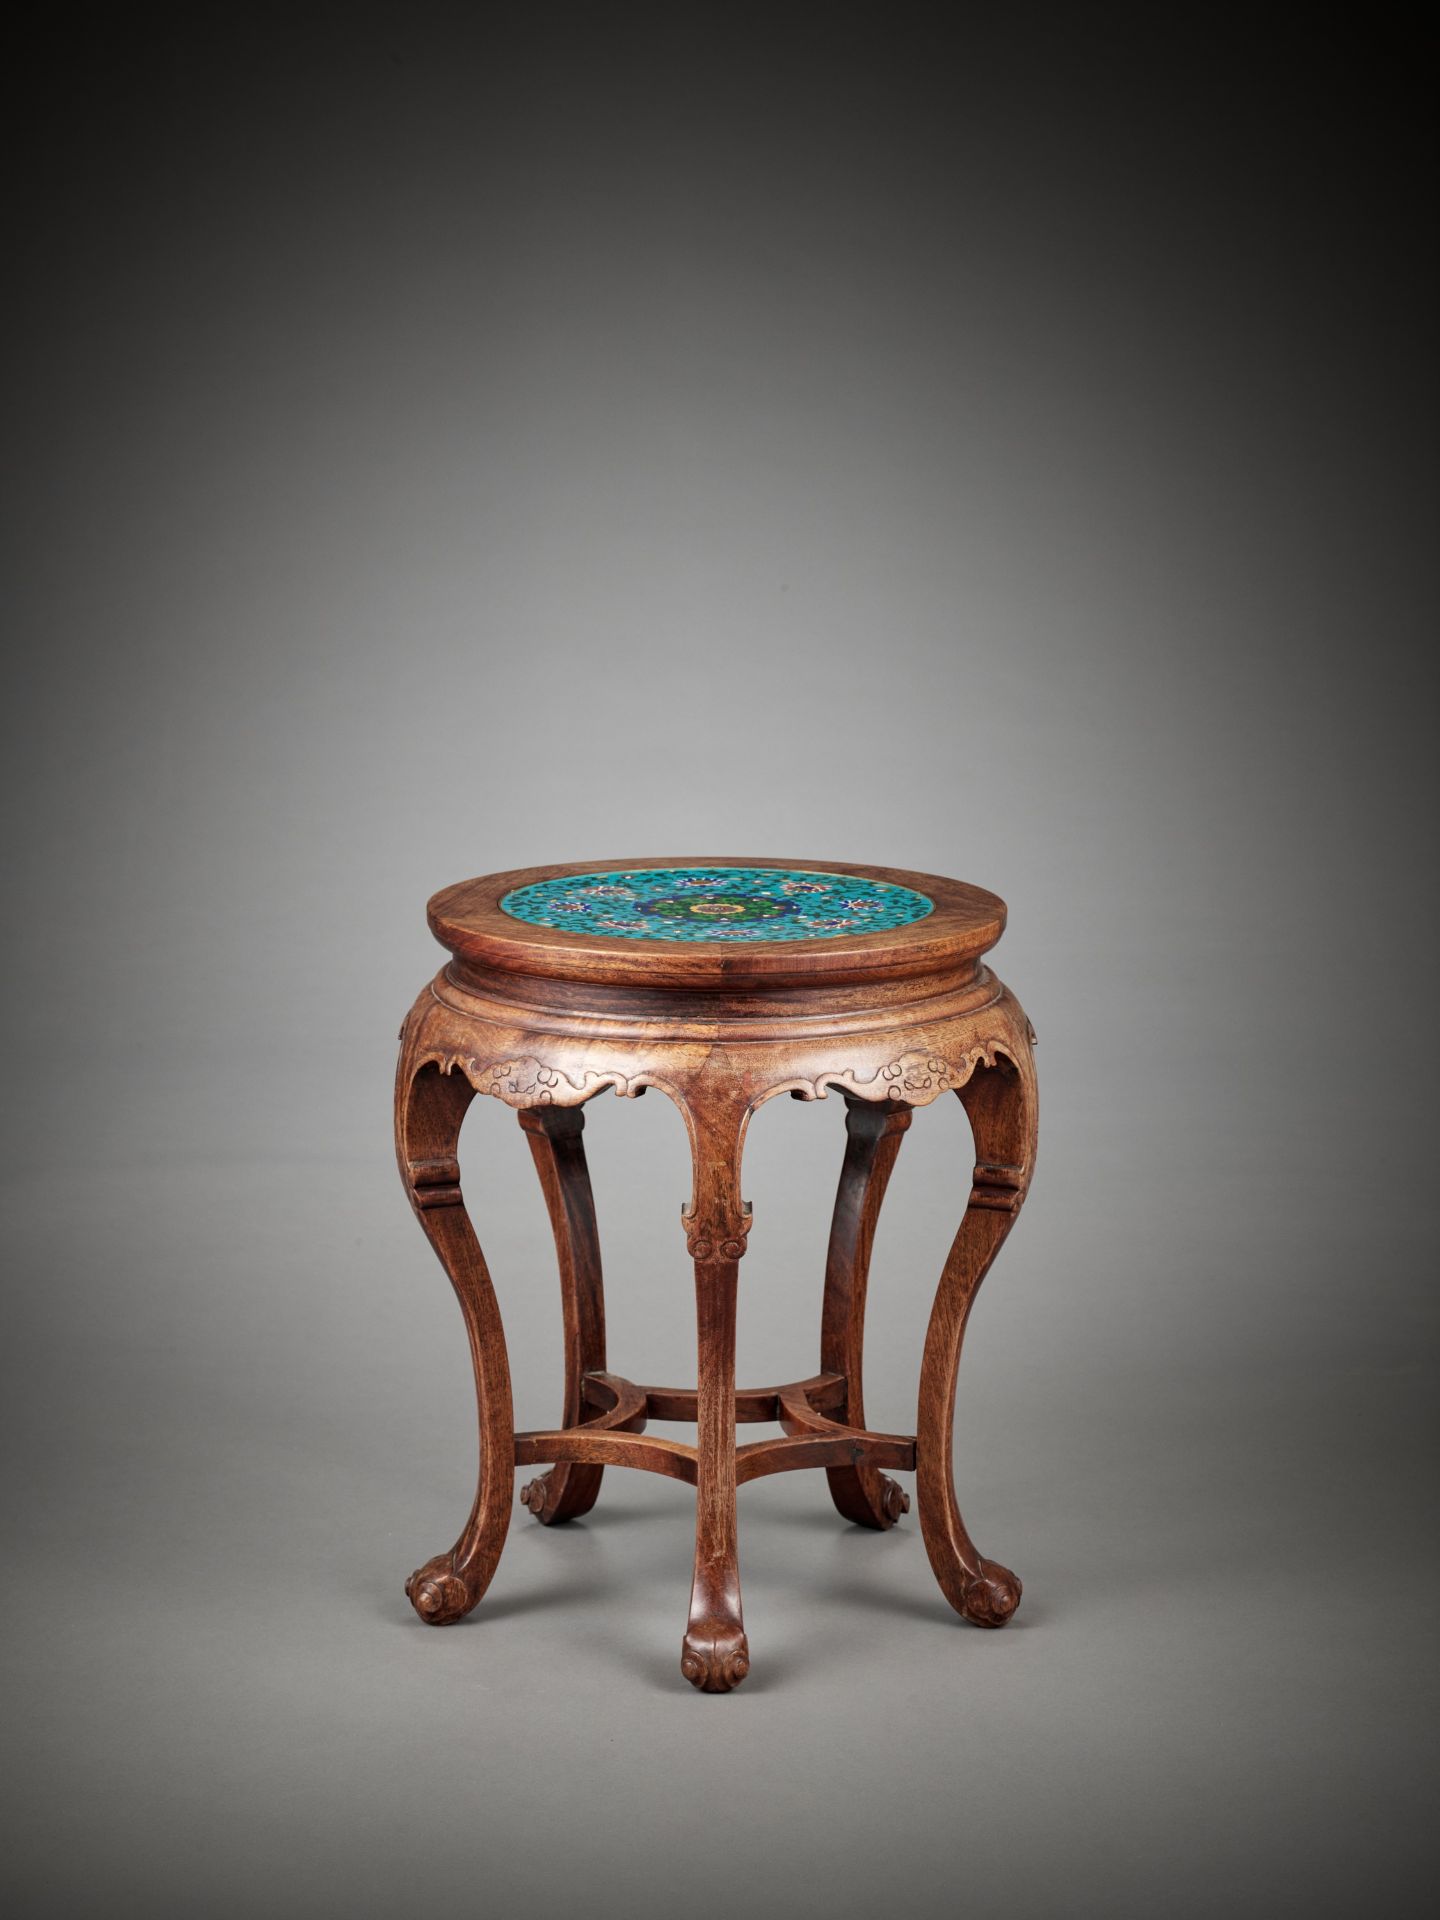 A CLOISONNE ENAMEL-INSET HARDWOOD STAND, LATE QING TO REPUBLIC - Image 6 of 8